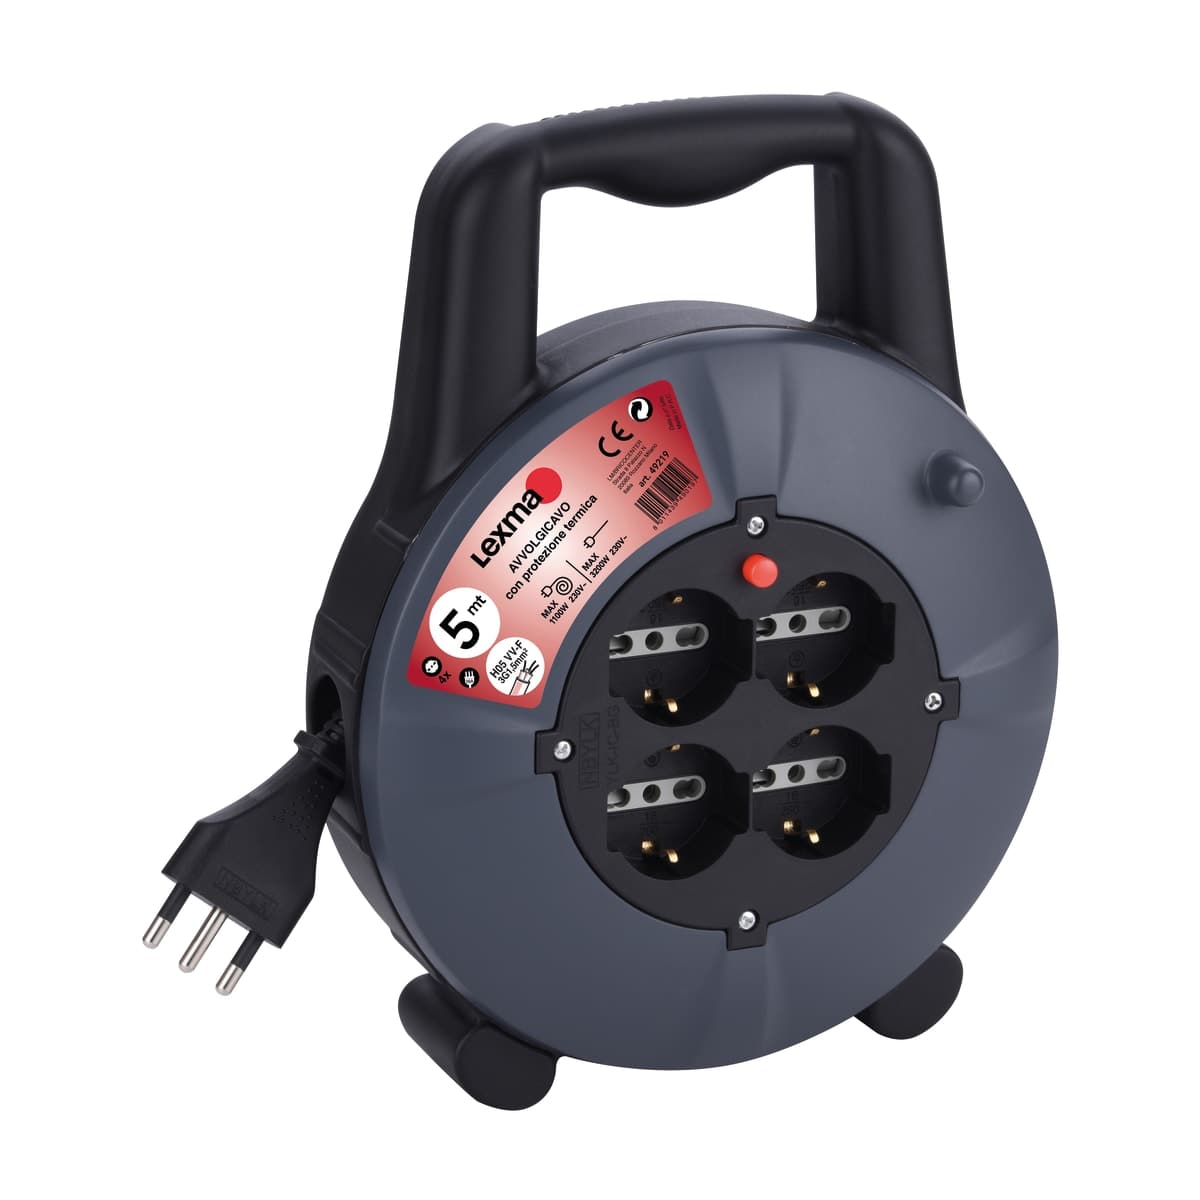 CABLE REEL 5MT PLUG 16A 4 UNIVERSAL SOCKETS WITH THERMAL CIRCUIT BREAKER